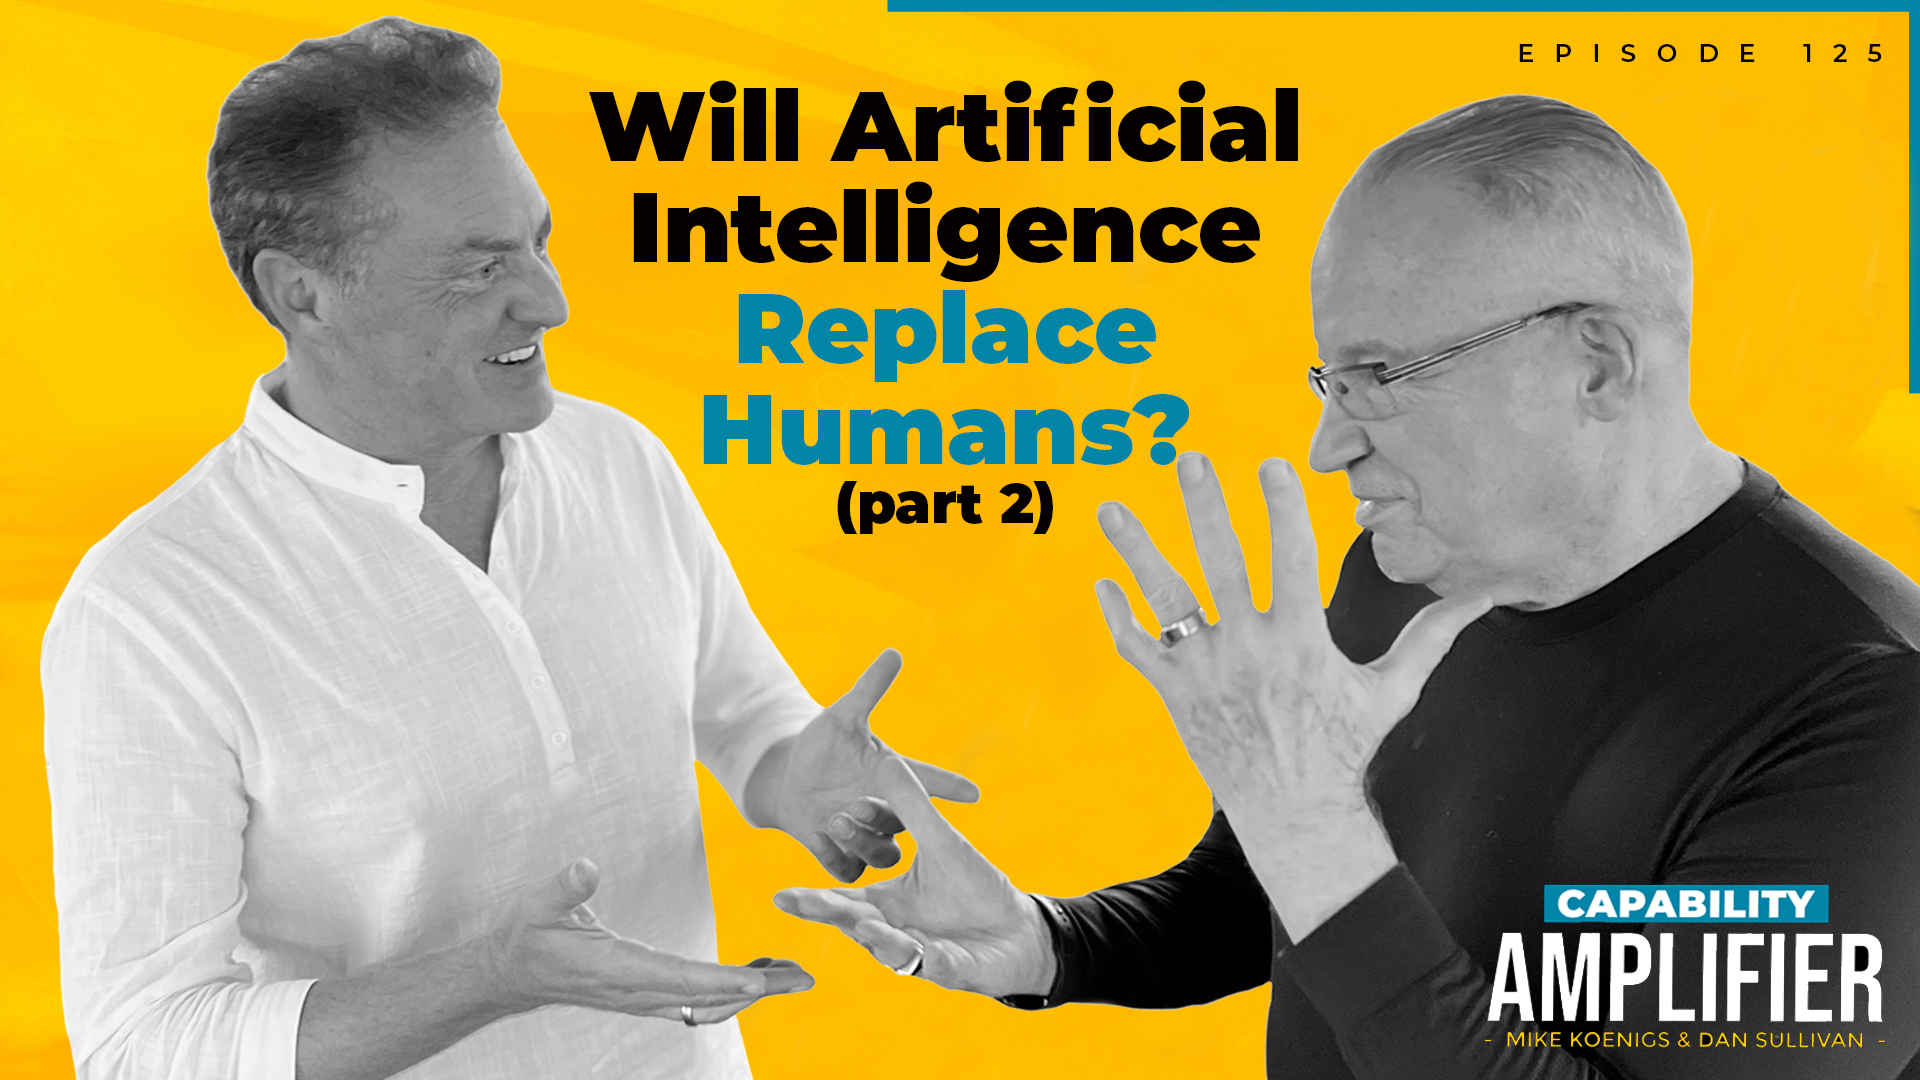 Episode 125 Art: Text reading "Will Artificial Intelligence Replace Humans? Part 2" on a yellow background with photos of Mike Koenigs and Dan Sullivan.